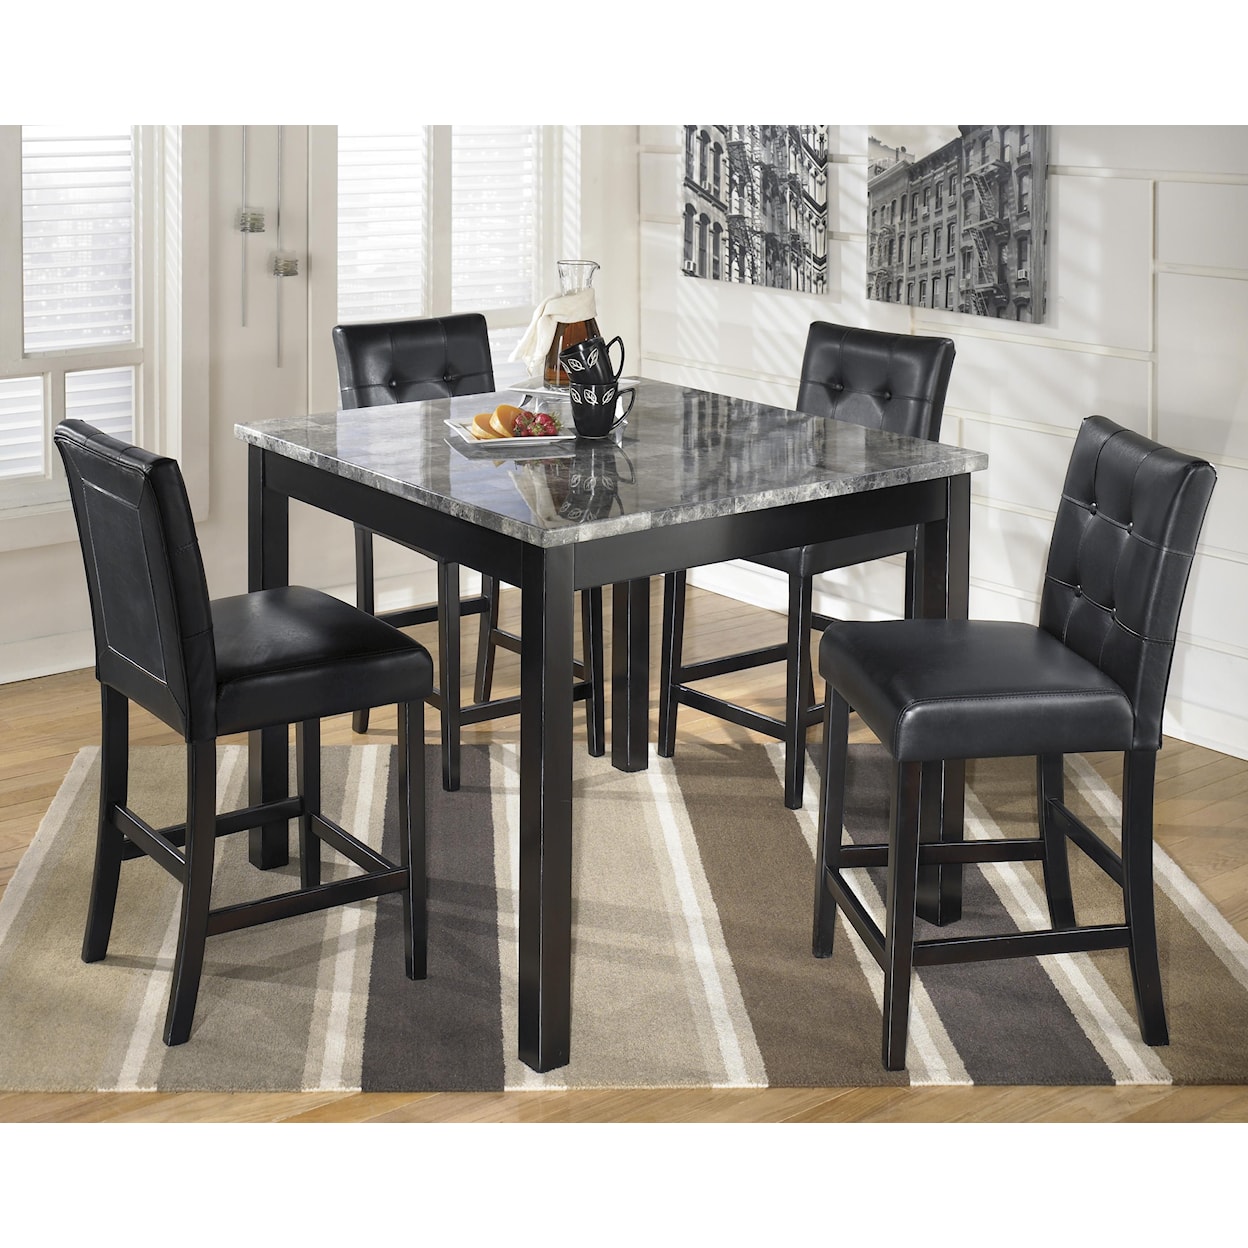 Signature Design by Ashley Maysville Square Counter Table Set